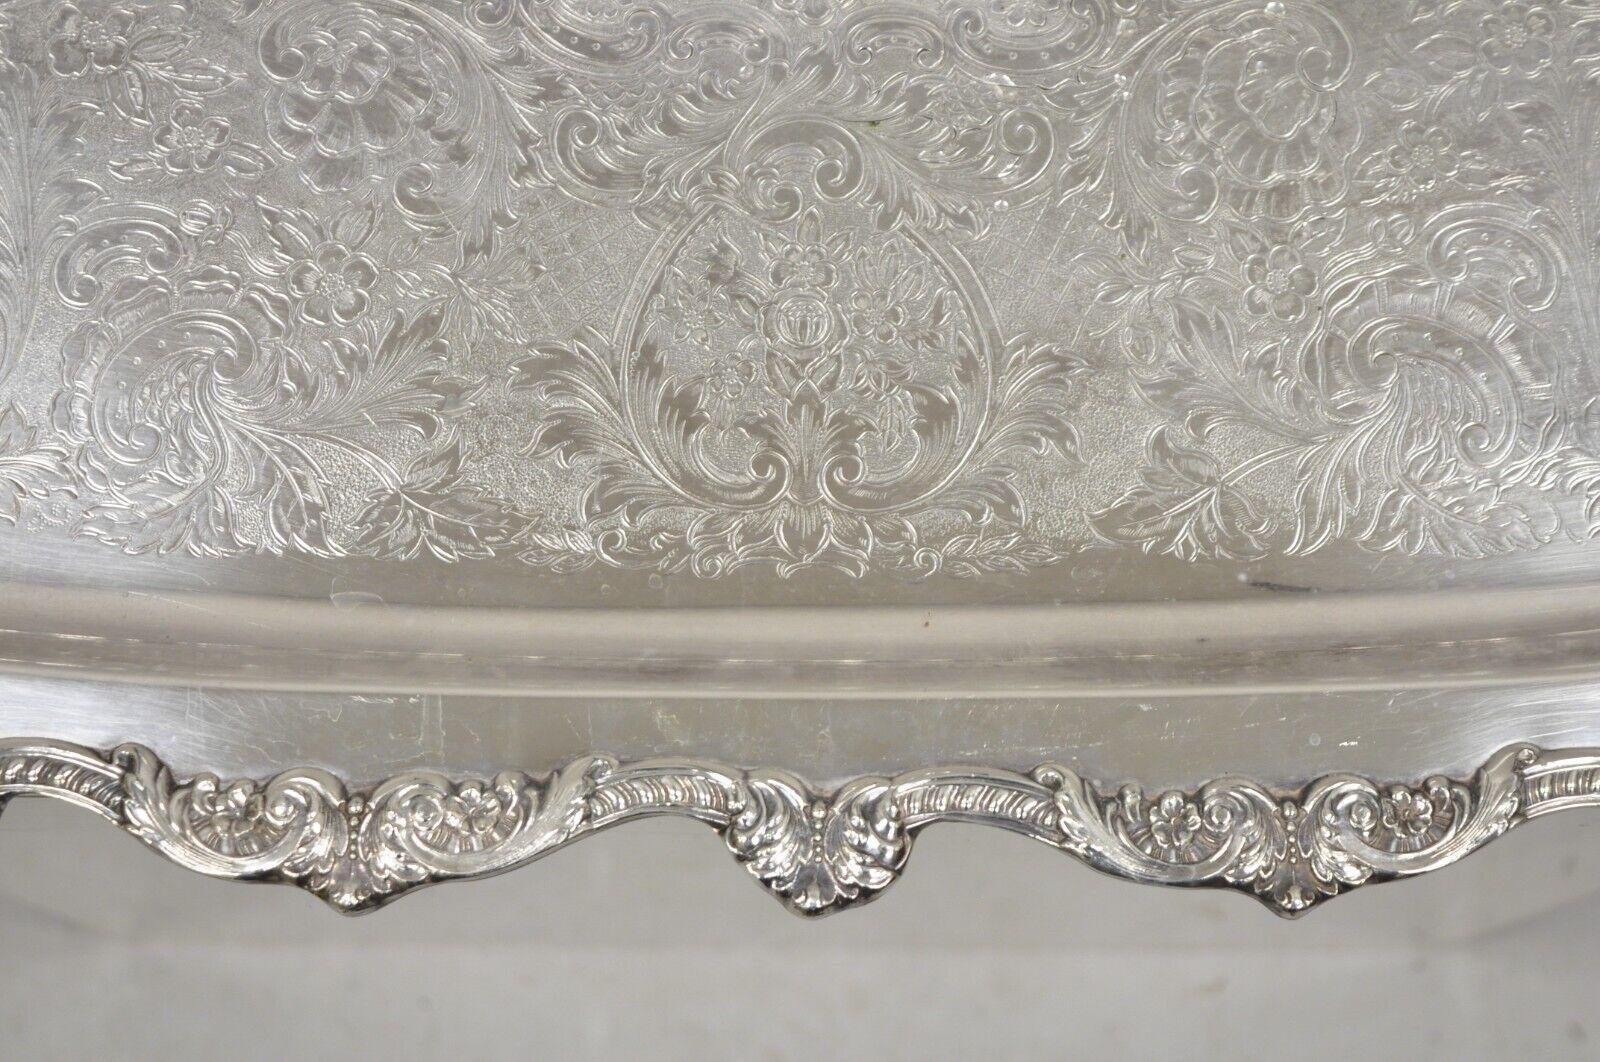 20th Century Vintage EPCA Old English by Poole 5032 Silver Plated Ornate Serving Platter Tray For Sale